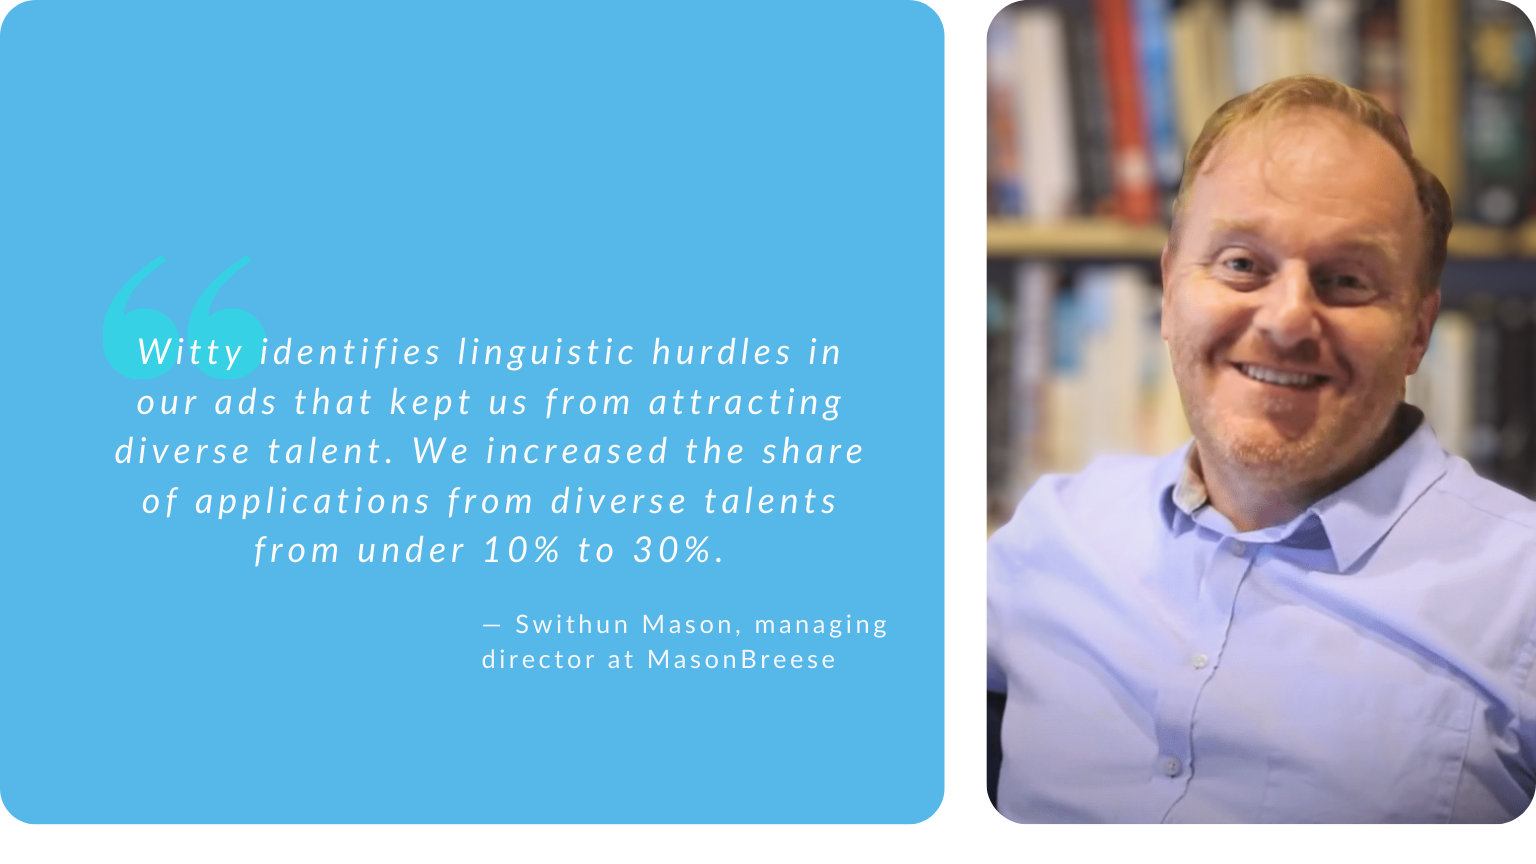 Quote by Swithun Mason: Witty identifies linguistic hurdles that deterred diverse talent. We increased the share of diverse applications from under 10% to 30%.